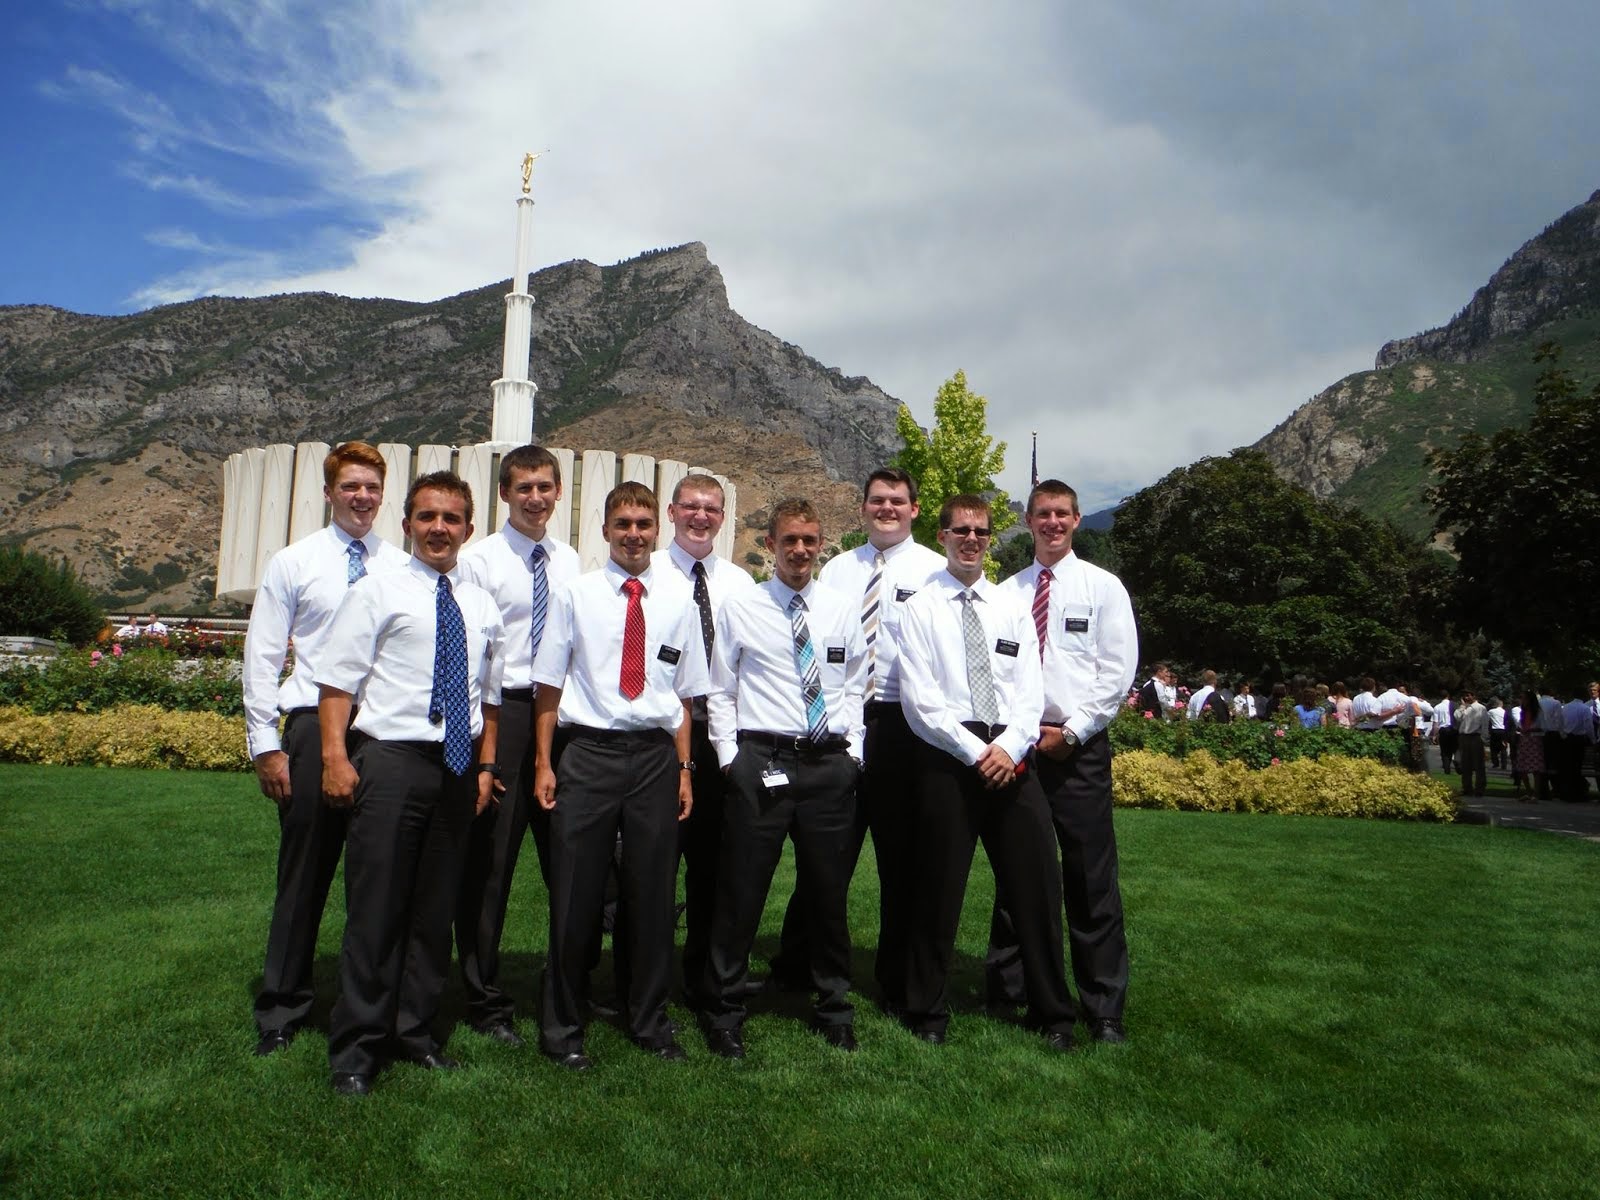 MISSIONARY TRAINING CENTER (MTC) DISTRICT AT THE PROVO TEMPLE